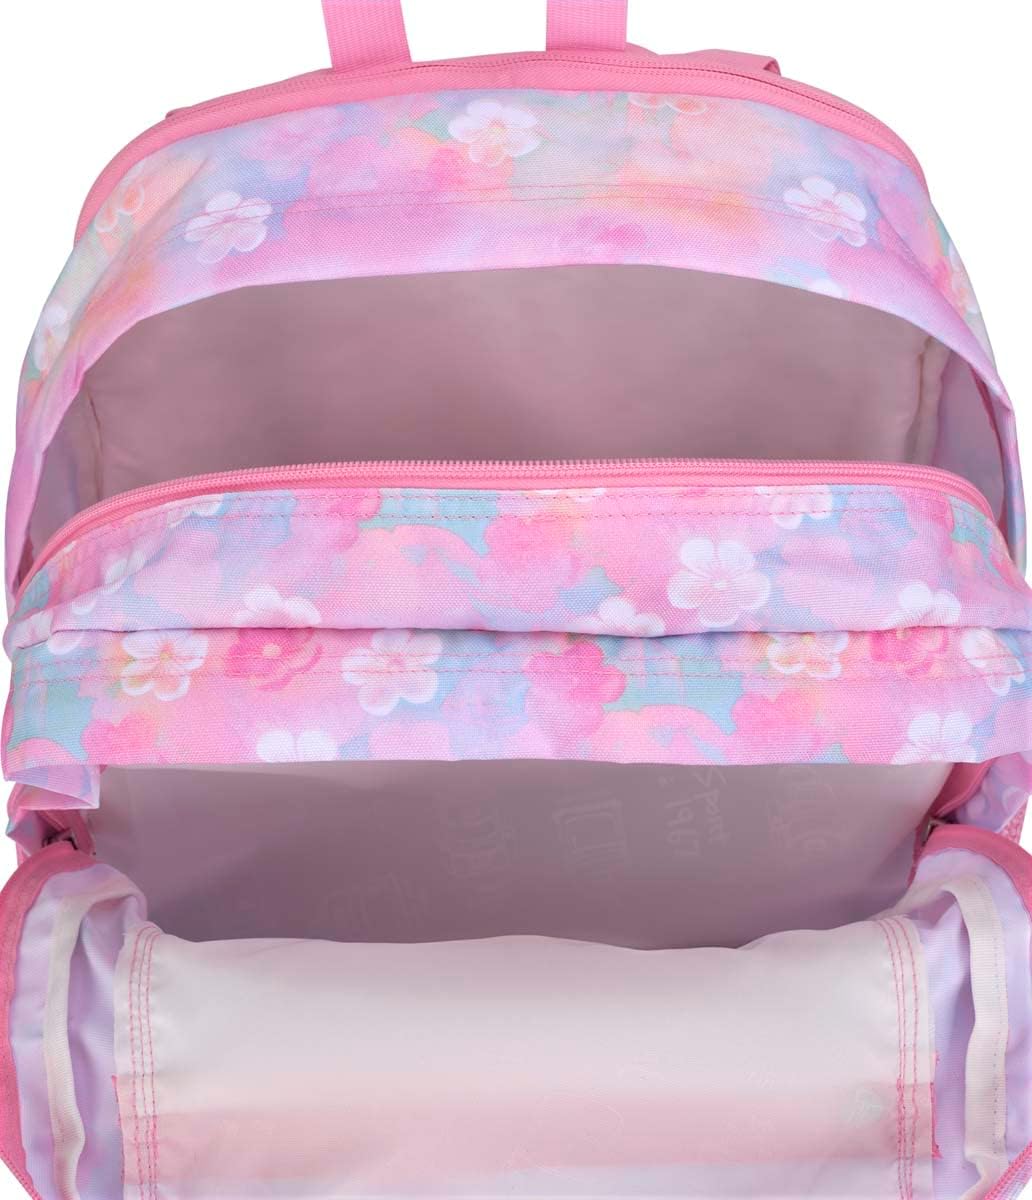 JanSport Backpack Big Student Neon Daisy Pink